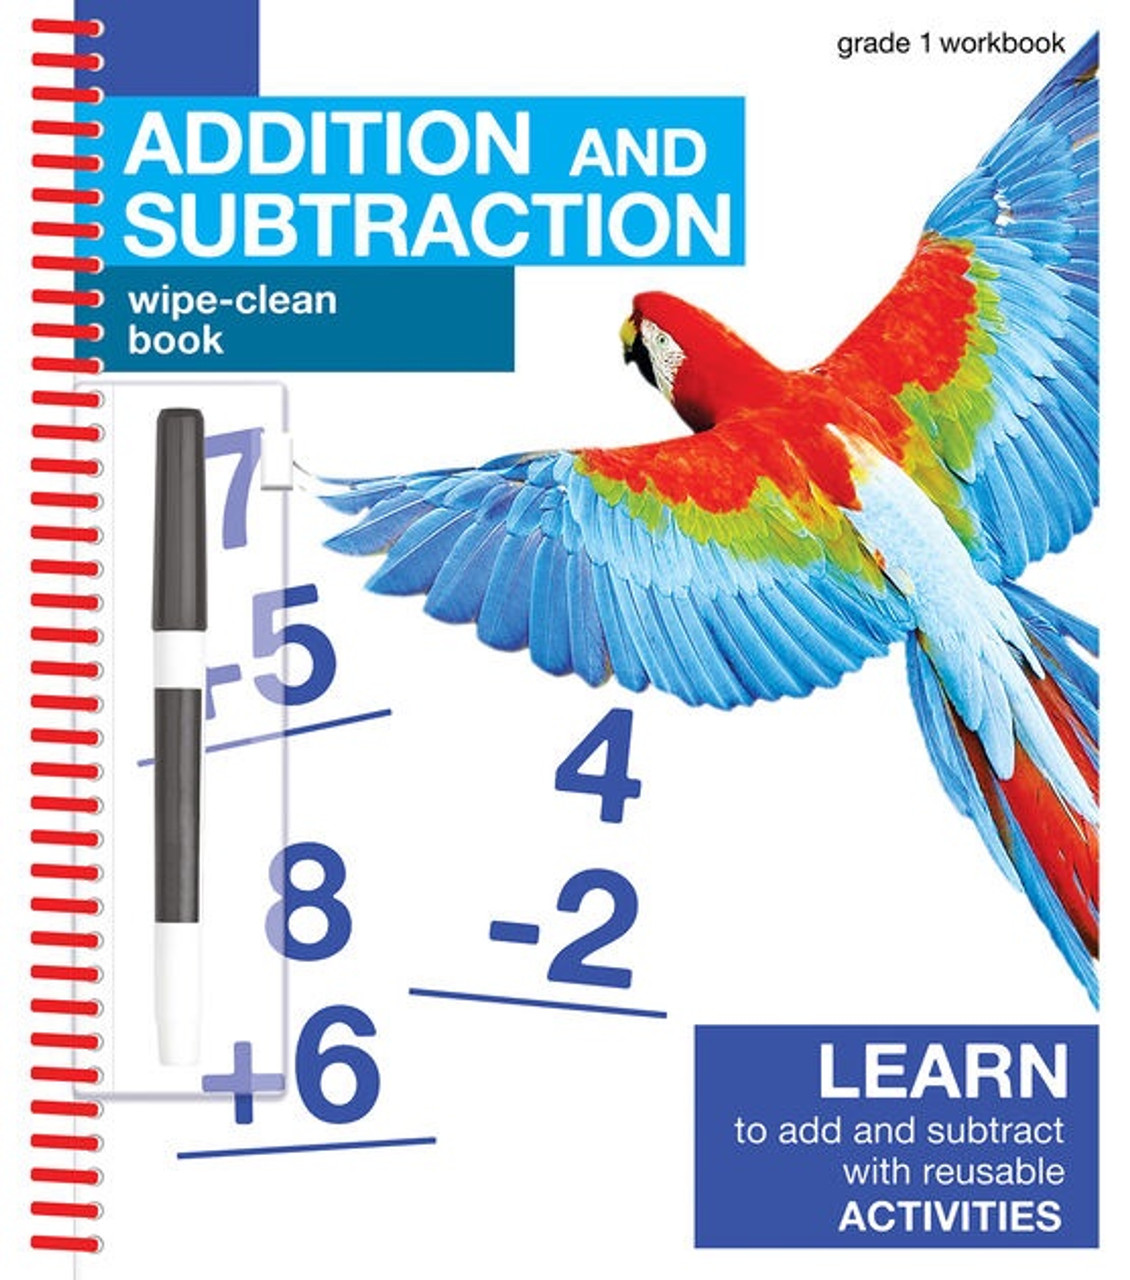 ADDITION AND SUBTRACTION WIPE-CLEAN